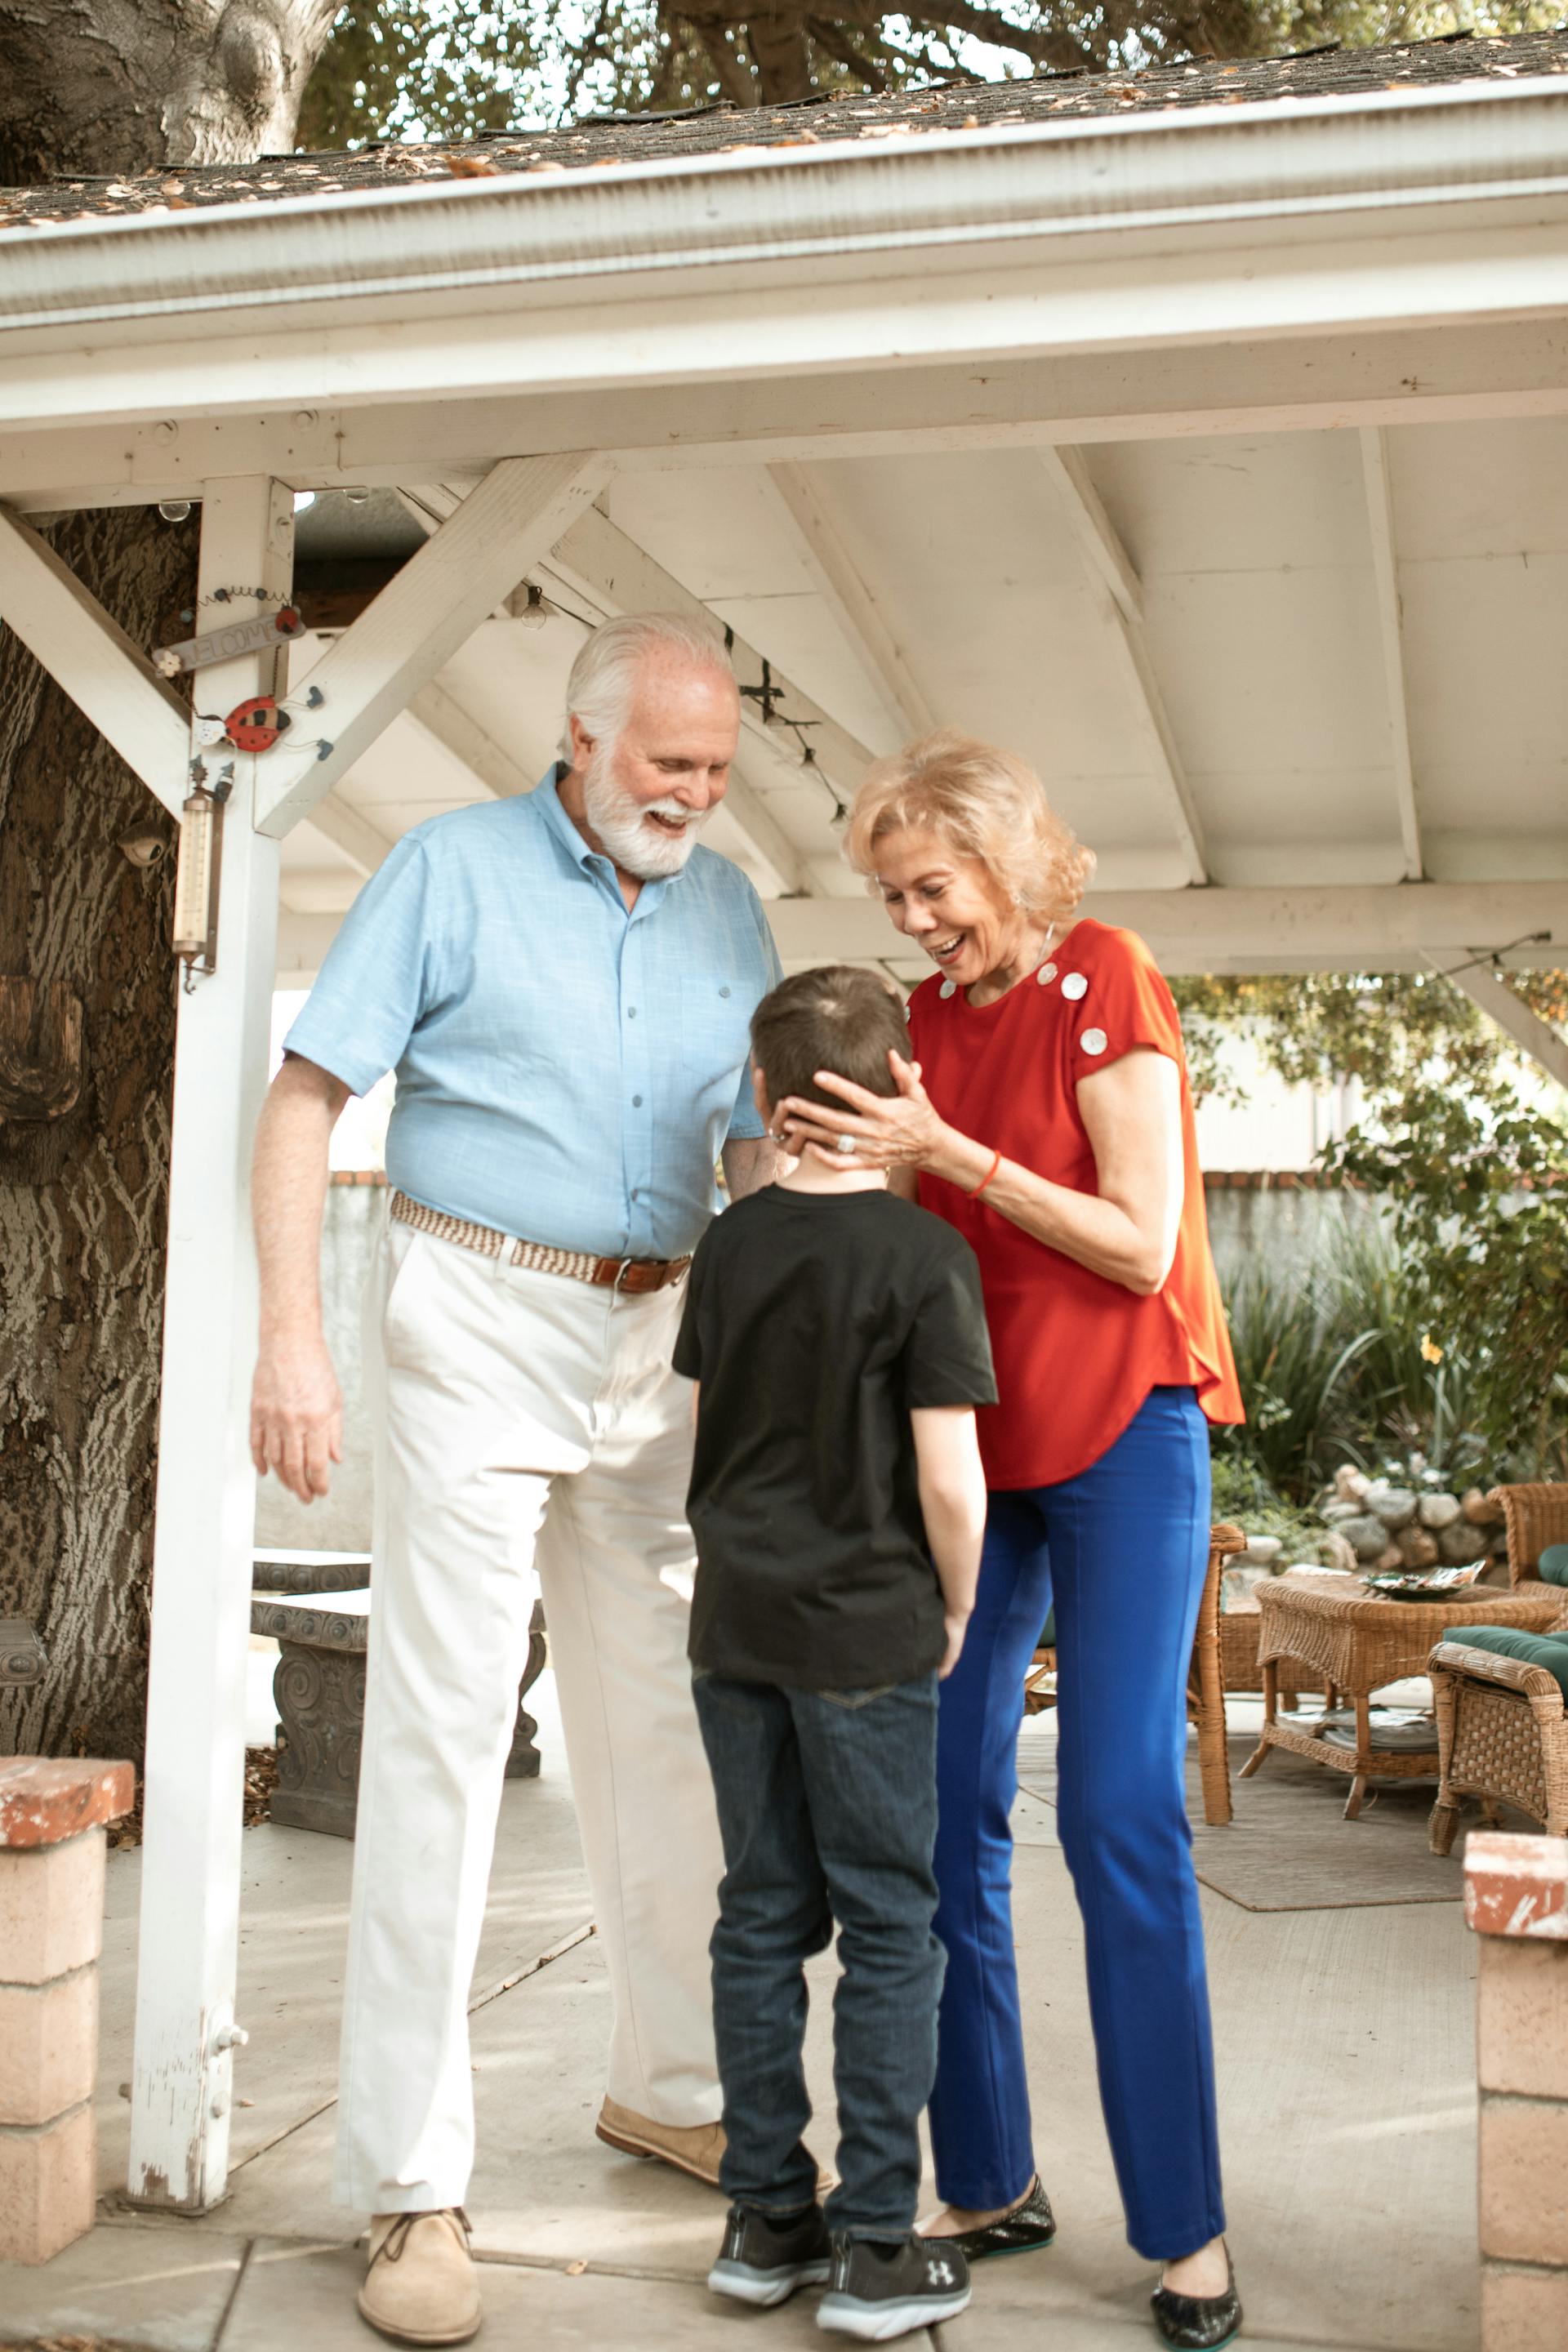 Grandparents talking with their grandson | Source: Pexels